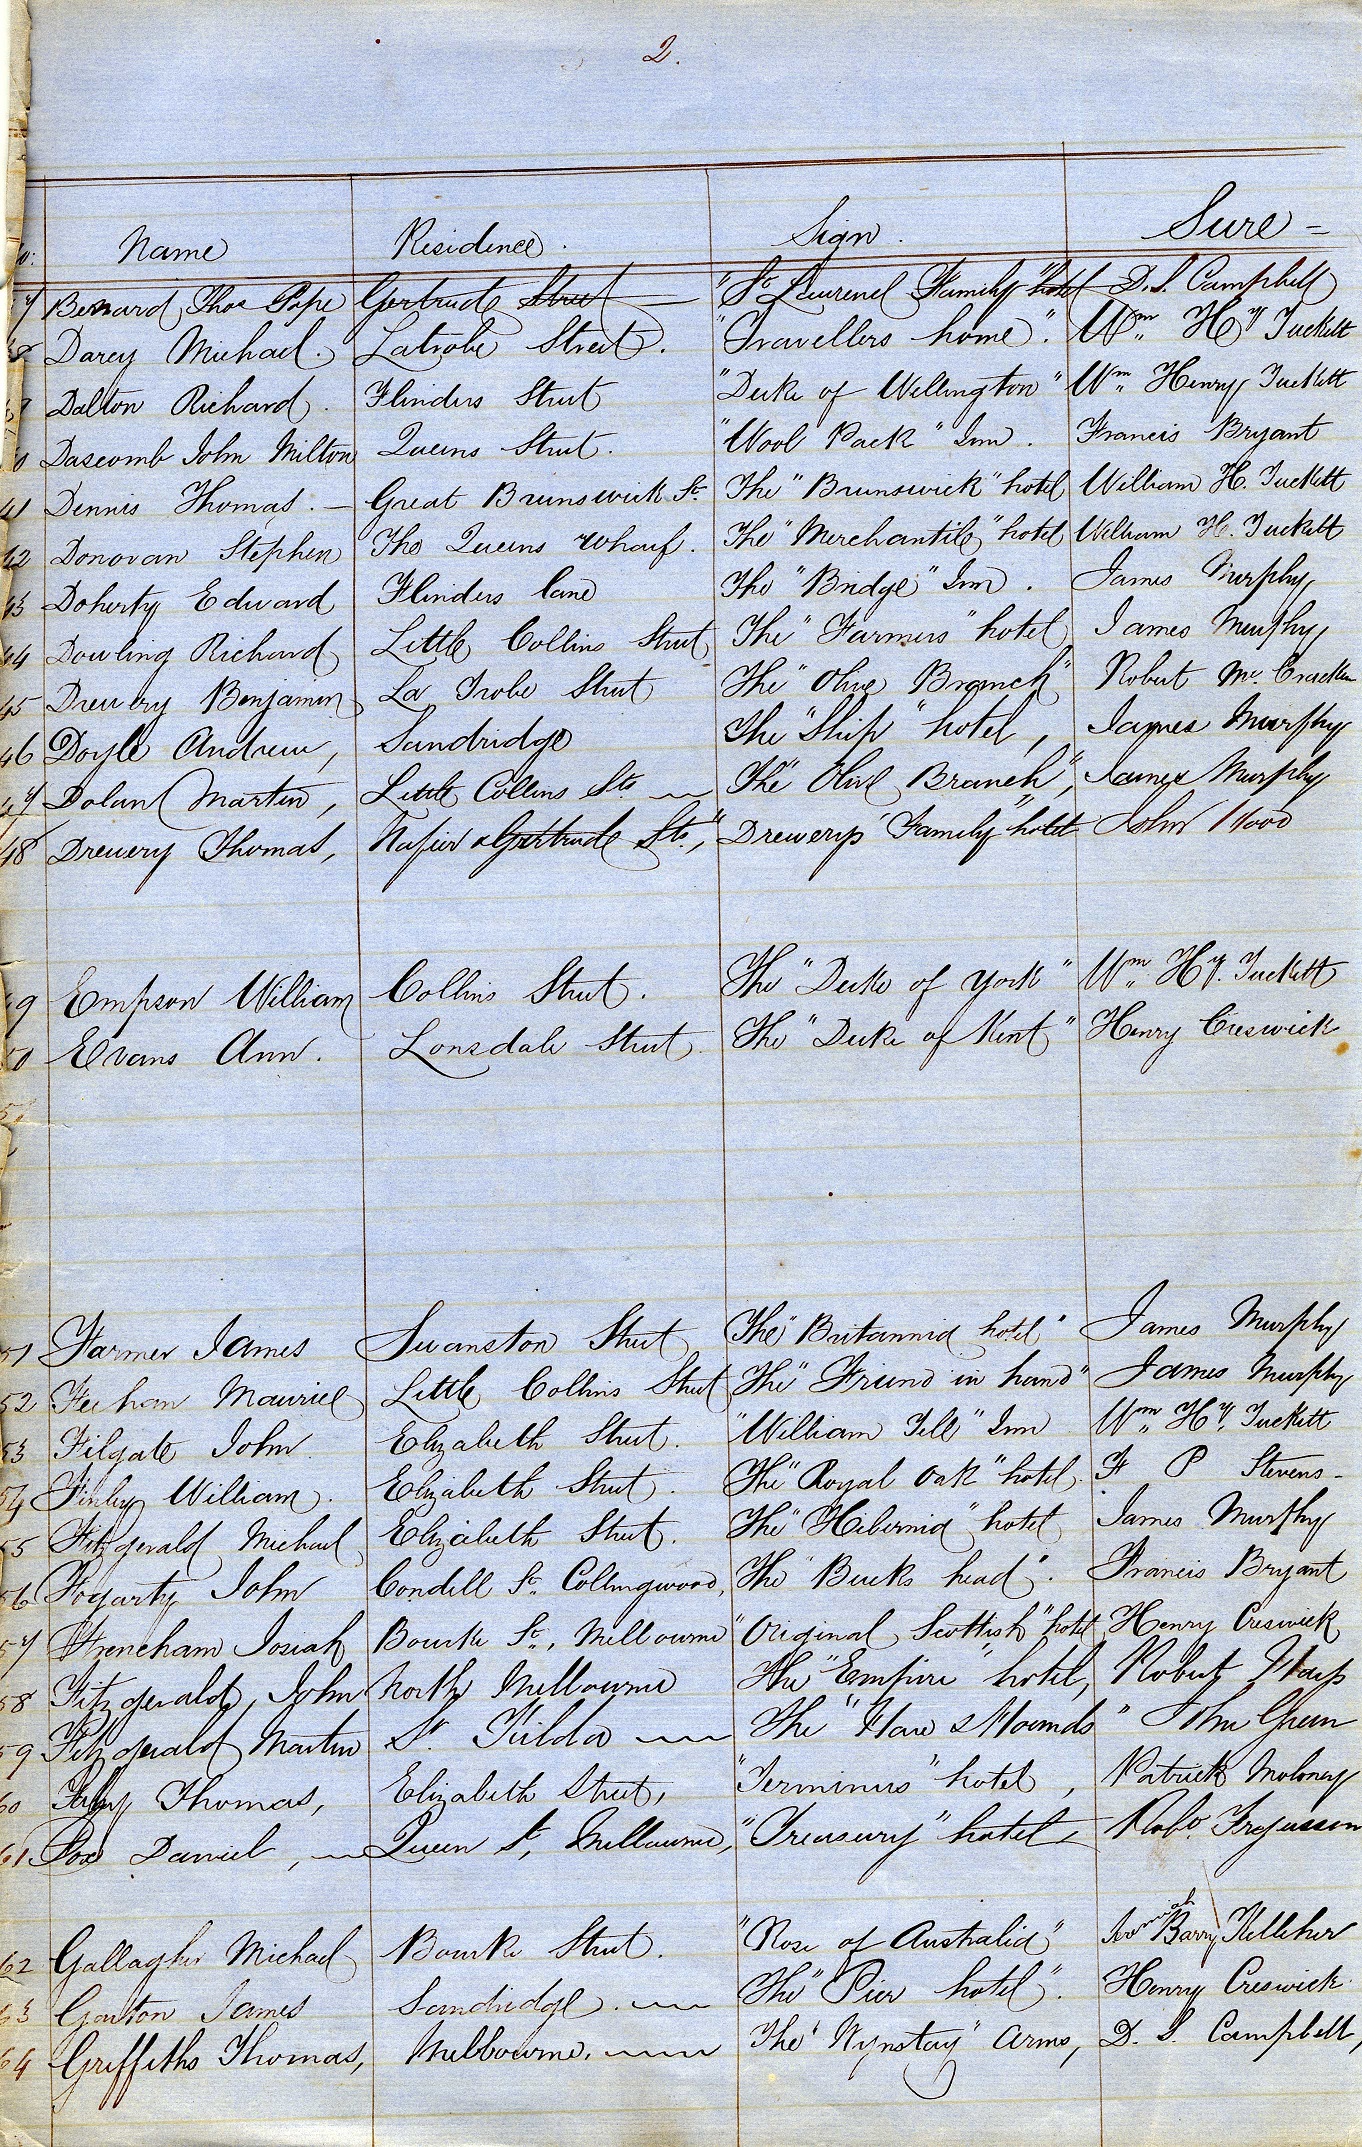 List of publican’s licences for the City of Melbourne records Benjamin Drewry as the licensee at the Olive Branch Hotel